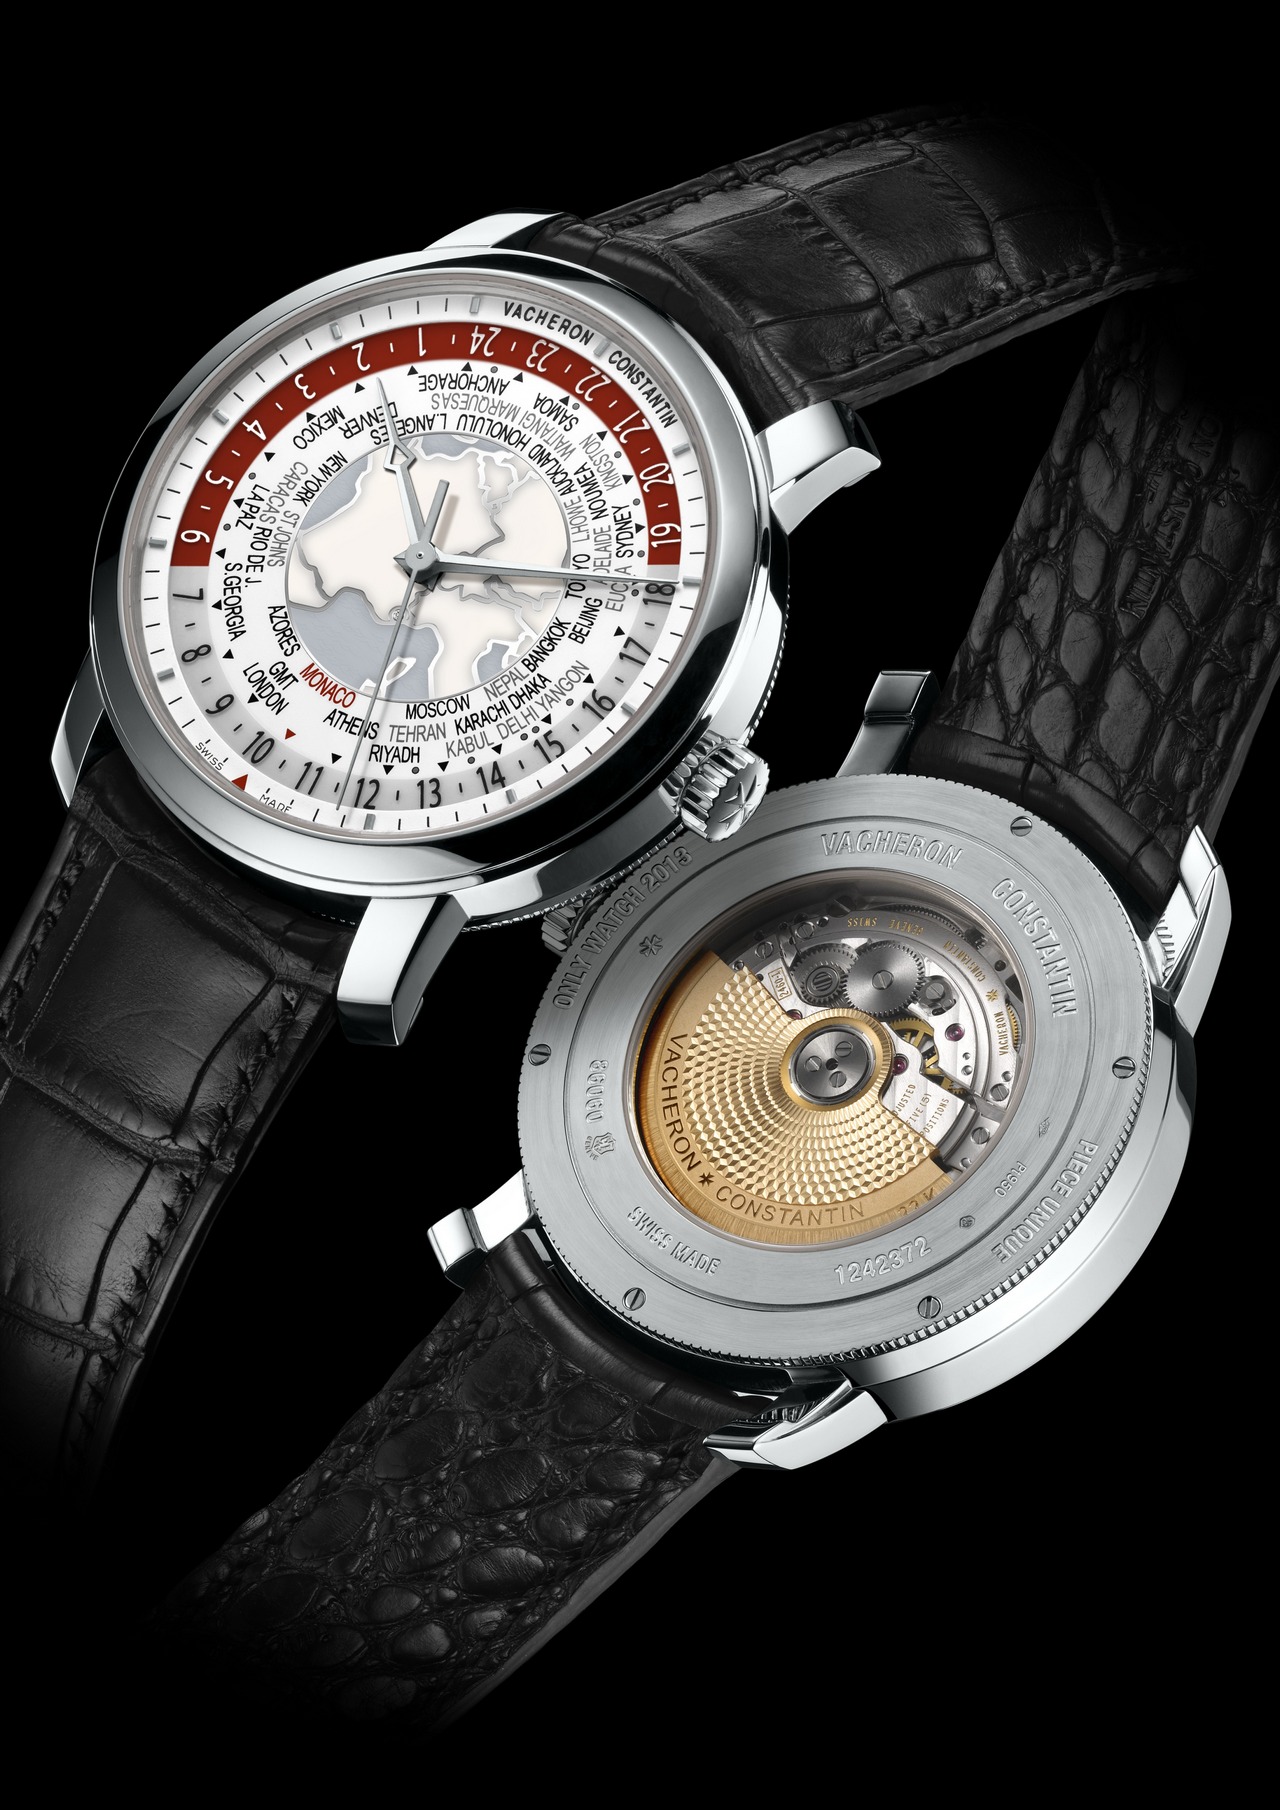 anteprima-only-watch-2013-vacheron-constantin-patrimony-traditionnelle-world-time_0-100_6